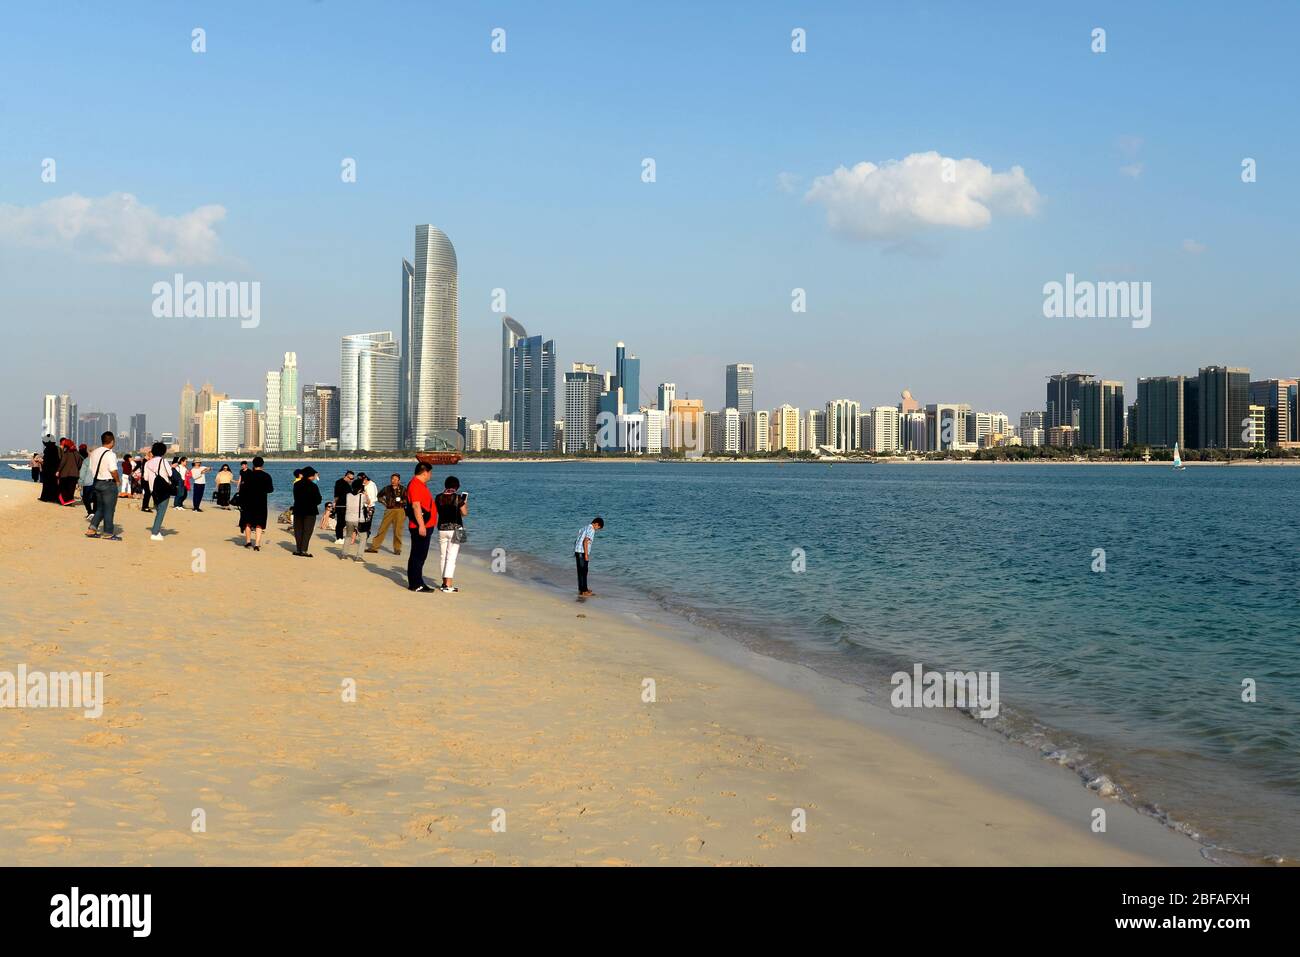 Tourists posing for photos with Abu Dhabi skyline with multiple skyscrapers behind. Popular sightseeing place for travelers in United Arab Emirates. Stock Photo